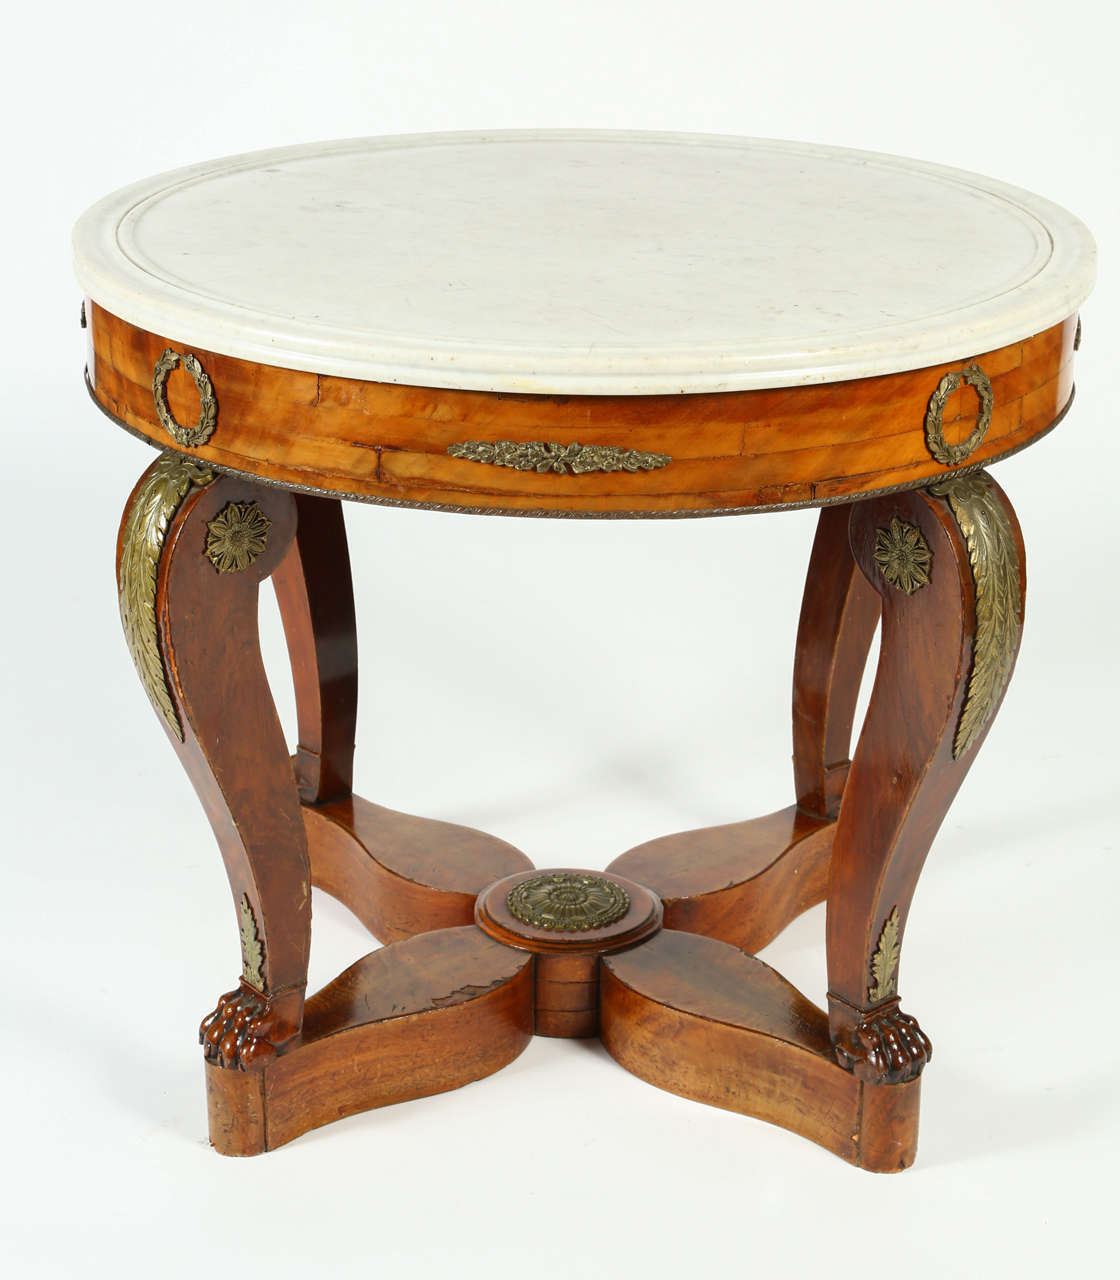 This Gueridon table from the French Restoration Era has a beautiful flame mahogany veneer and a white marble top. Delicate gilt-bronze garniture depicting laurel wreaths, palmettes, and roses decorate the apron, legs, and the star-shaped base. The